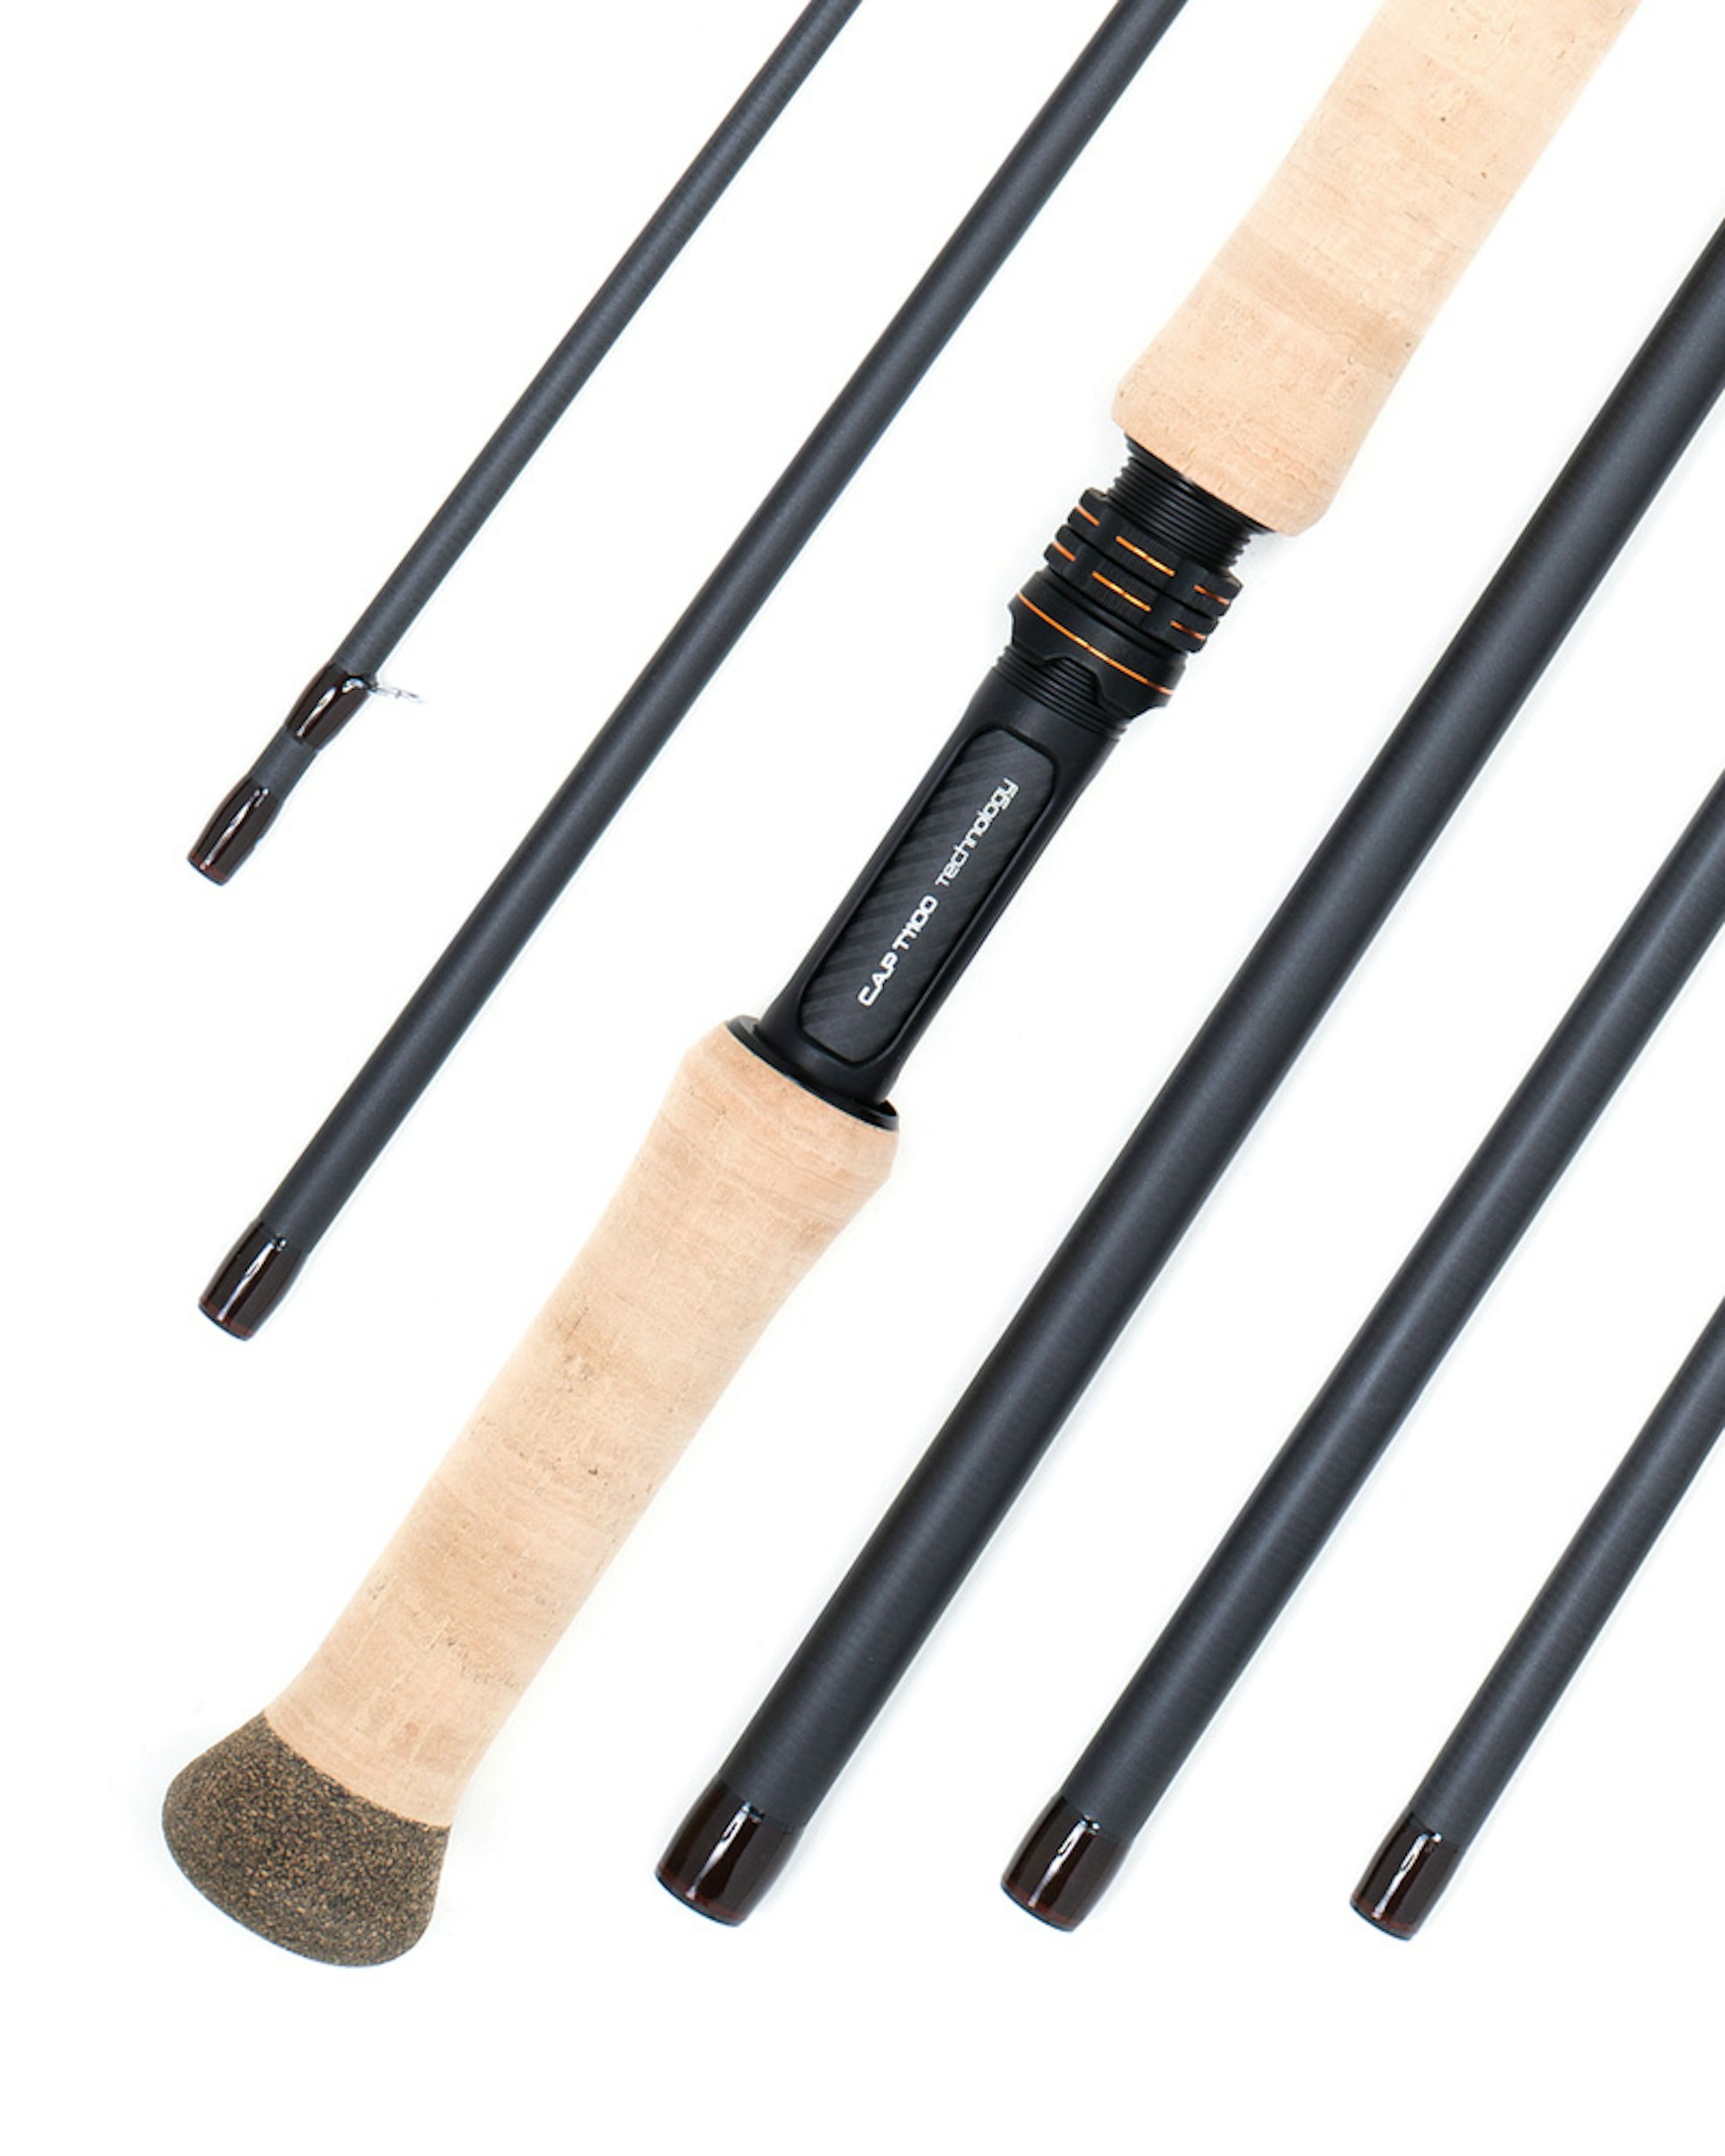 Double Hand Fly Rods - Salmon fly fishing rods